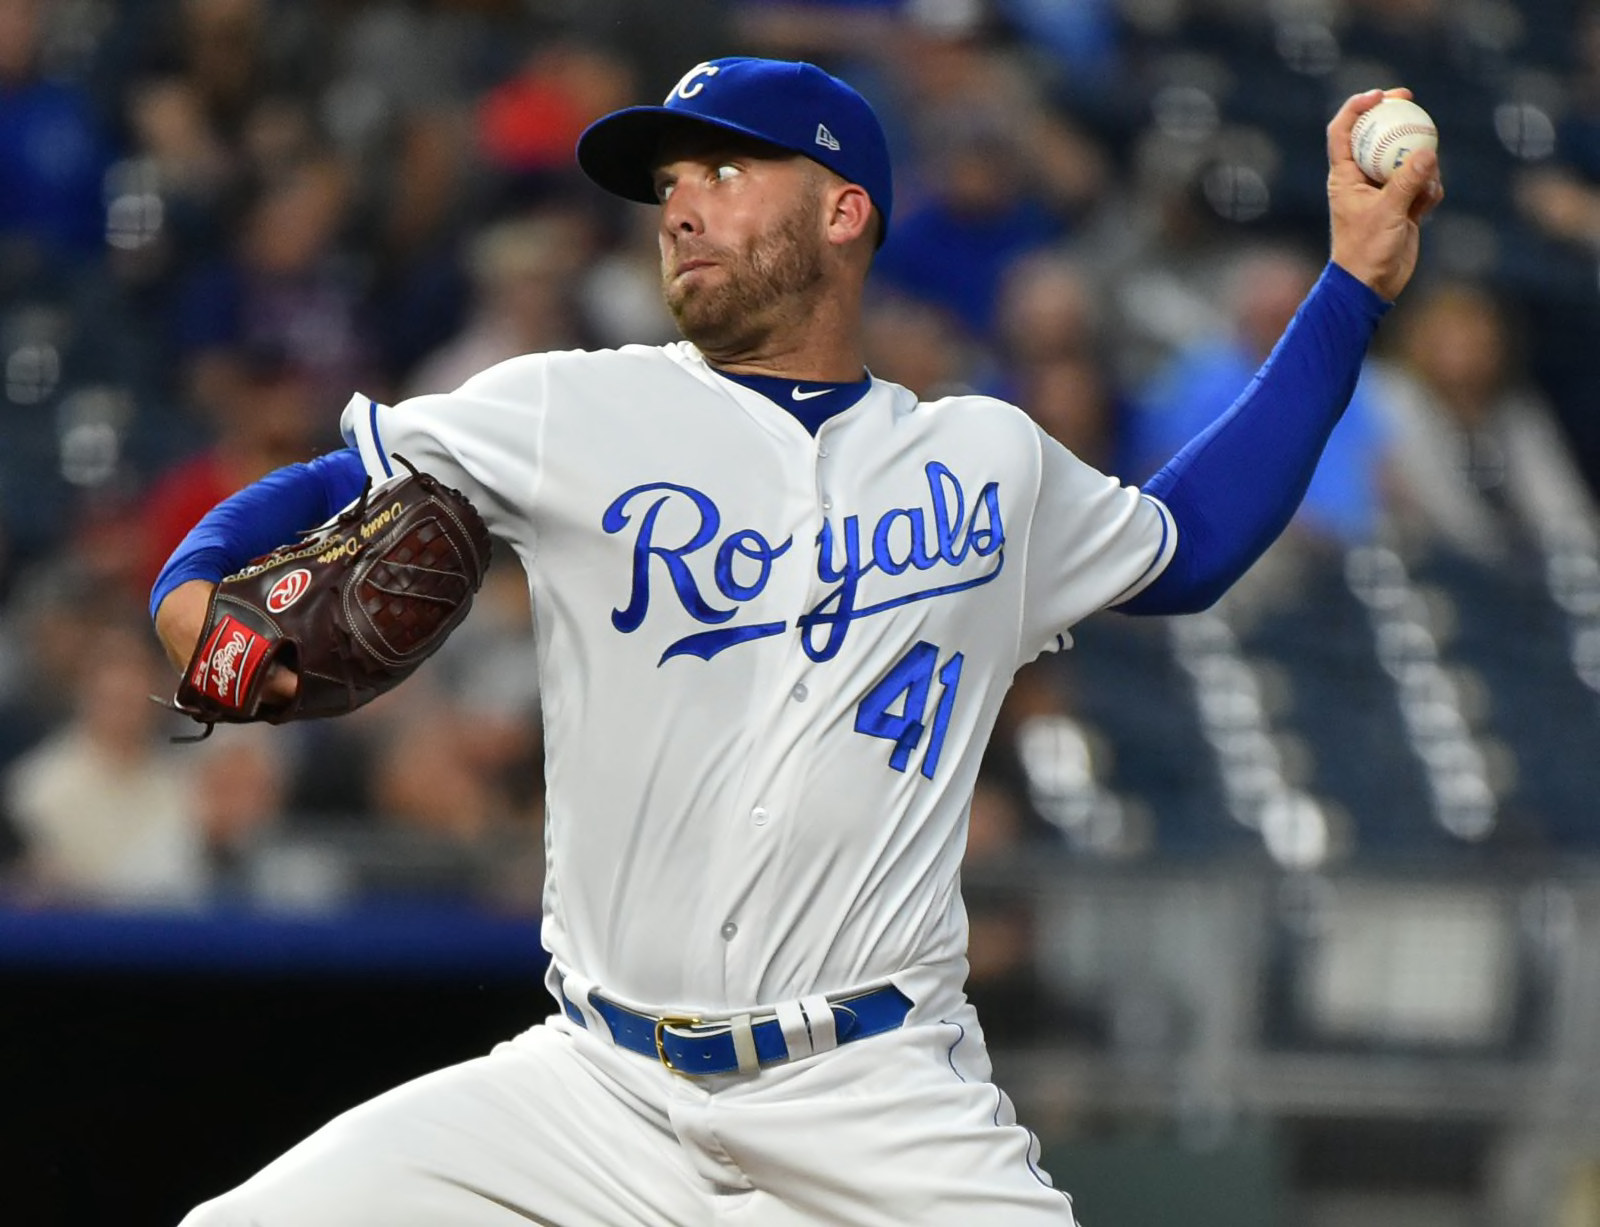 Bobblehead of Danny Duffy with his dog highlights Royals' 2019